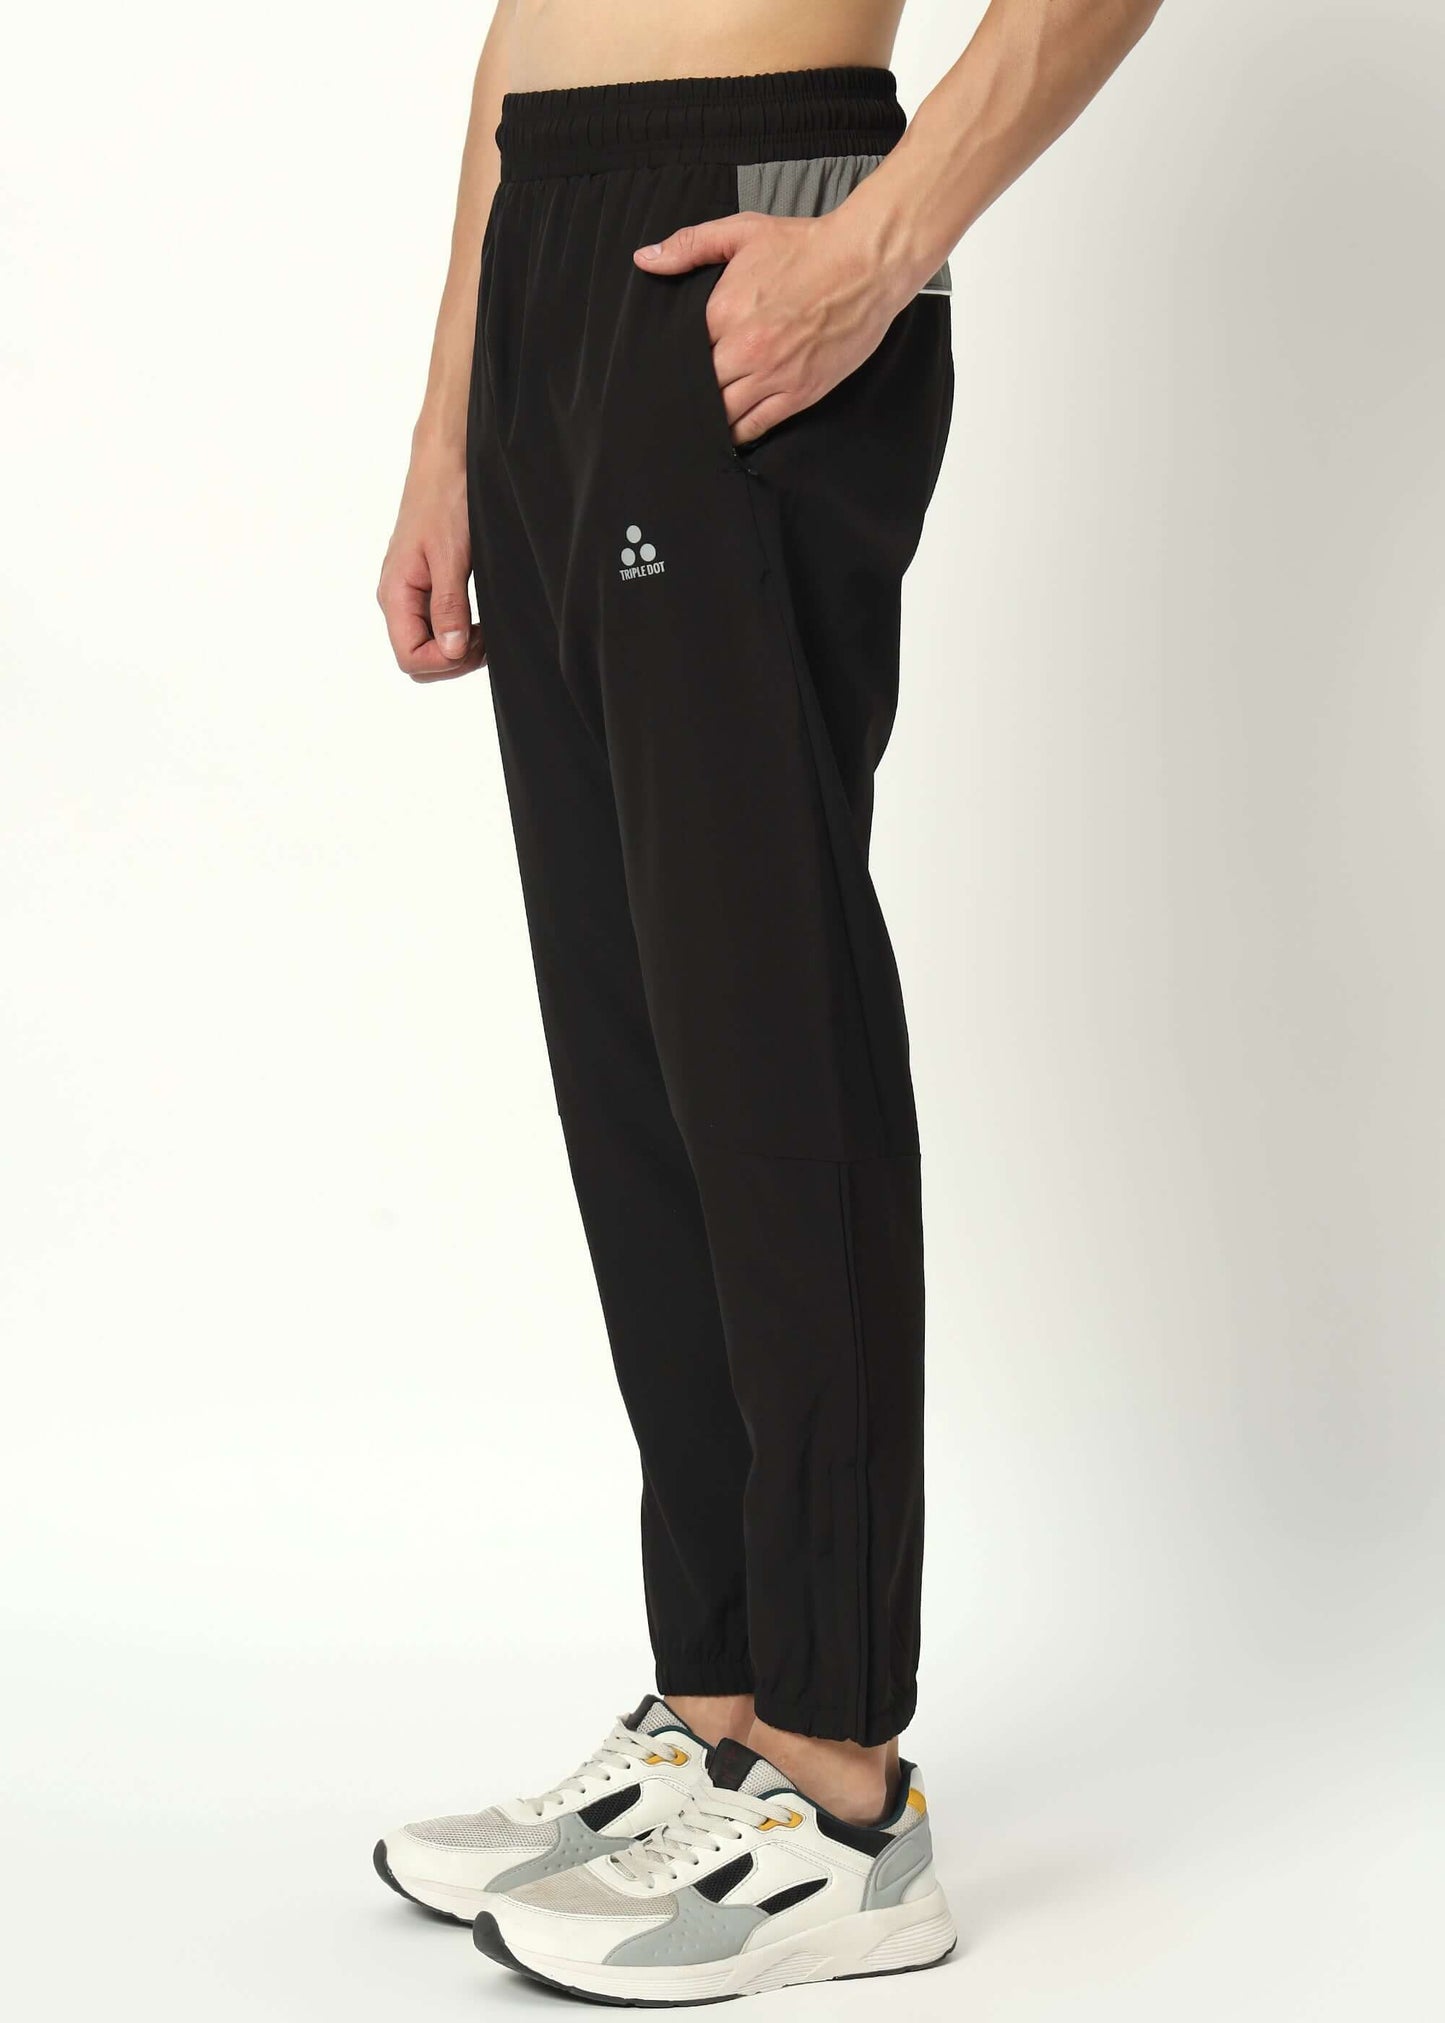 Track Pant for Men's Luxary Black